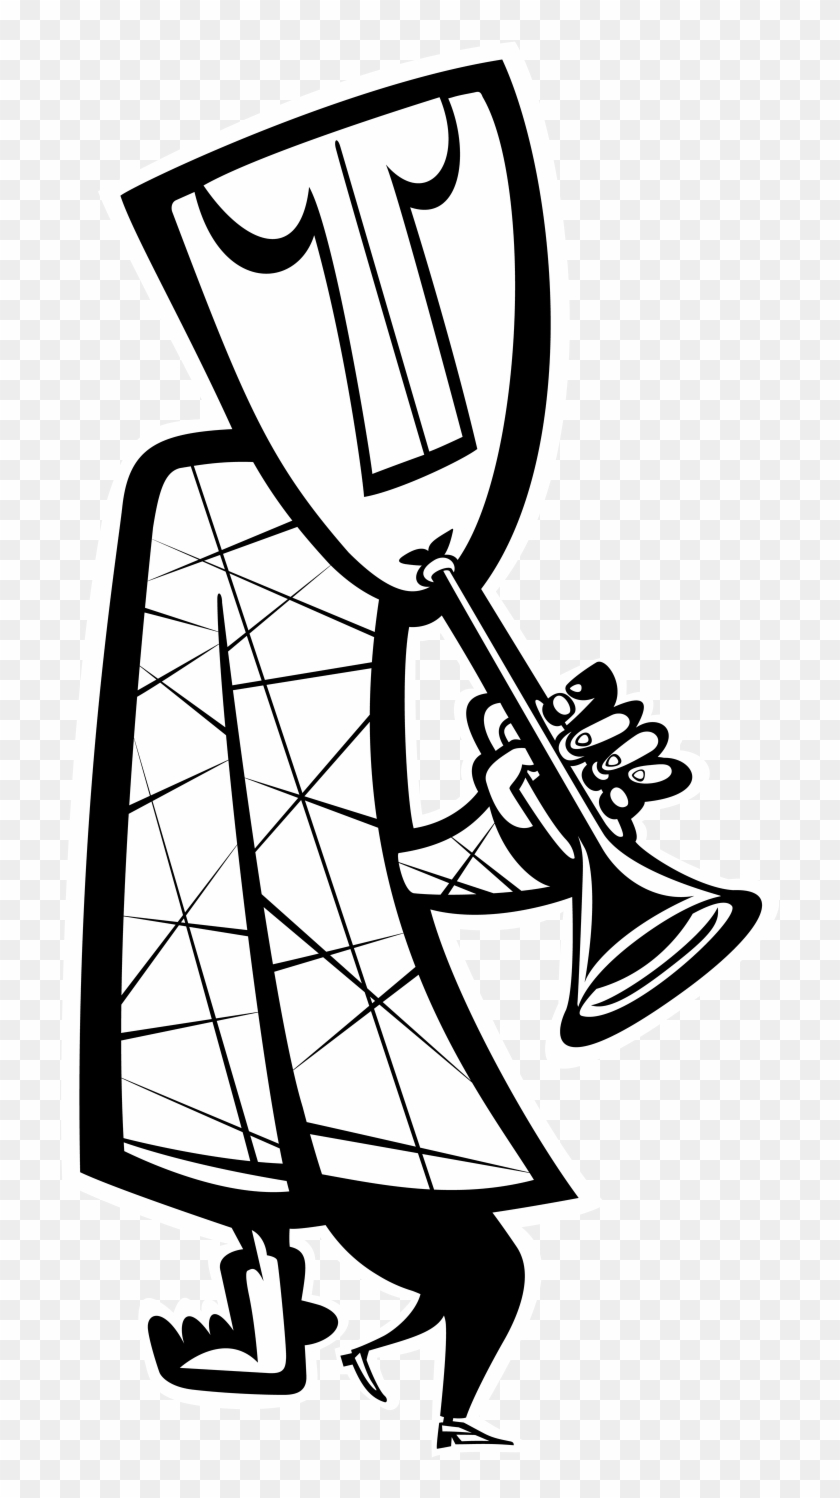 Jazzman, Horn Comes From A Pencil Sketch For My Stone - Streaming Media #1031321